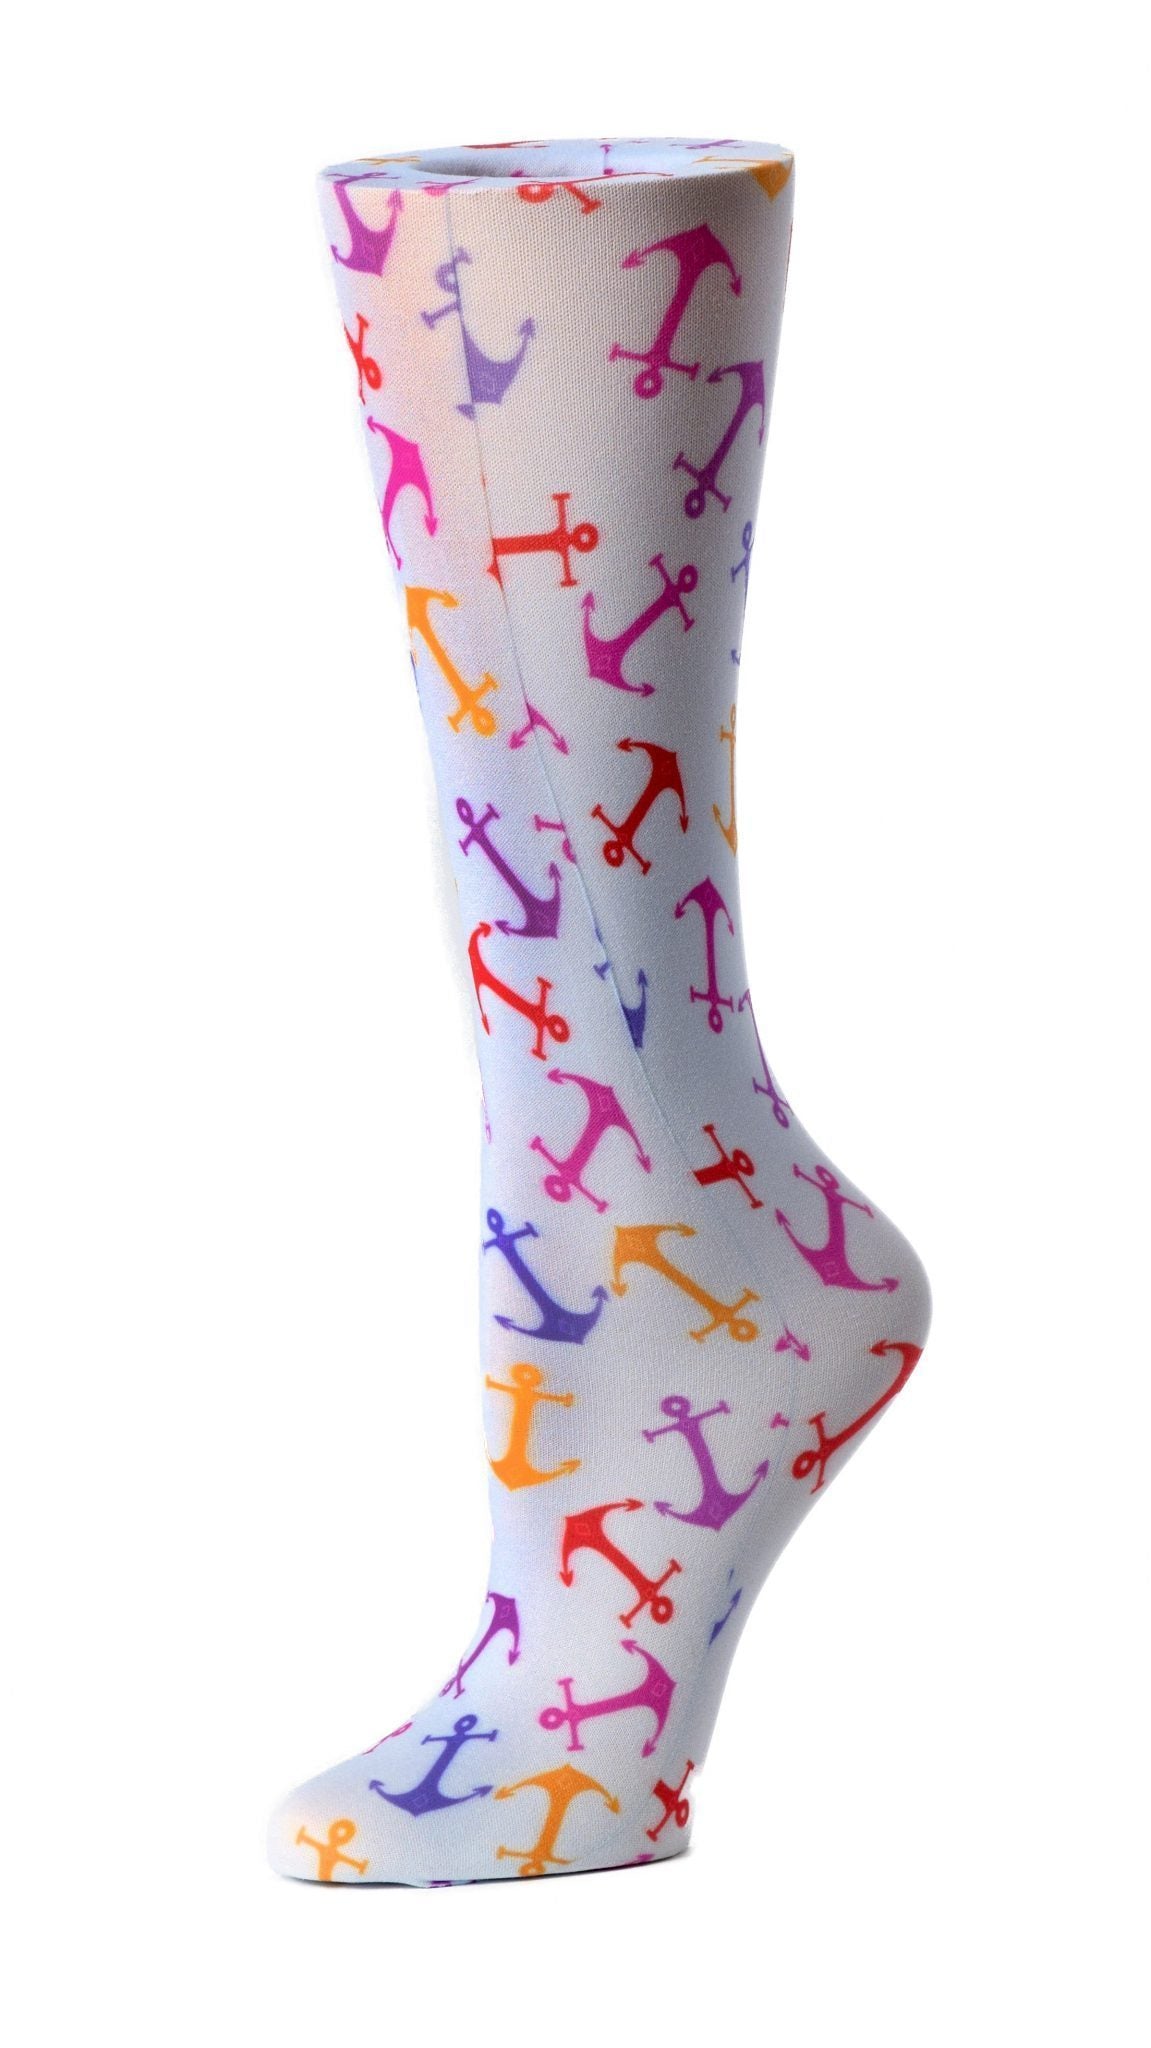 Cutieful Moderate Compression Socks 10-18 MMhg Wide Calf Knit Print Pattern Anchors at Parker's Clothing and Shoes.